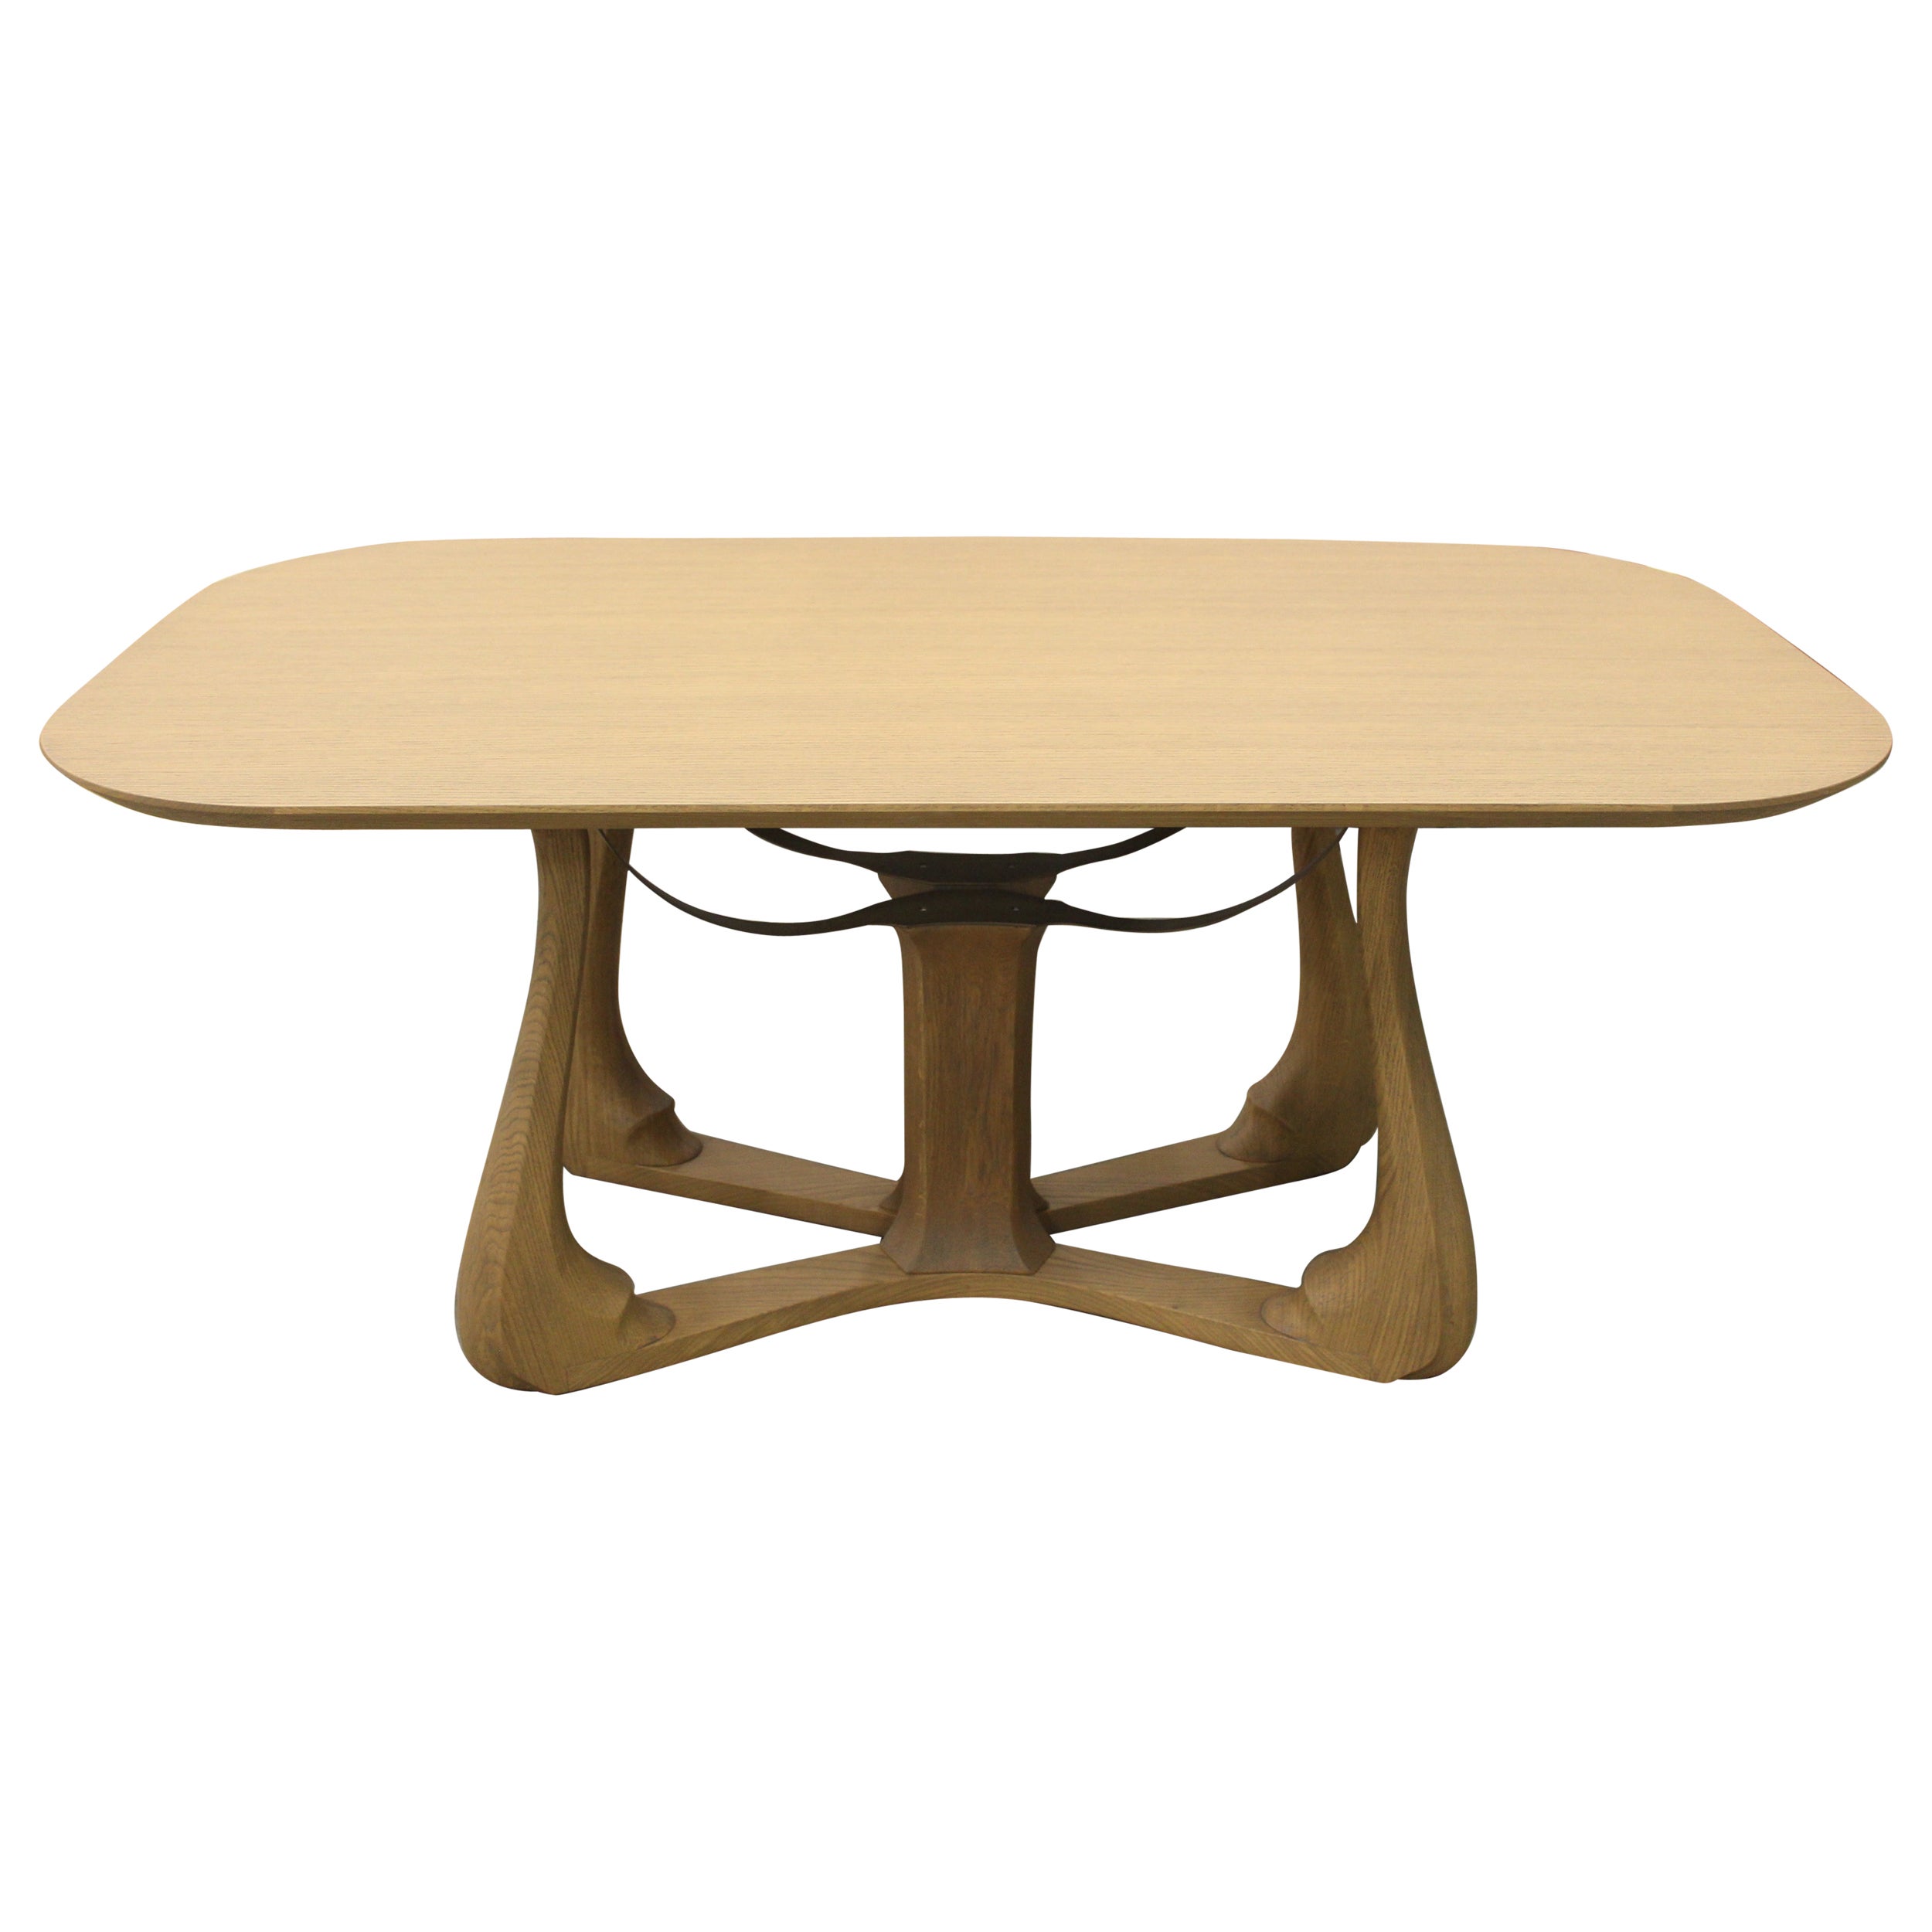 Arpa Oval Beige Dining Table in Solid Oak Wood With Carved Base - Metal Inserts For Sale